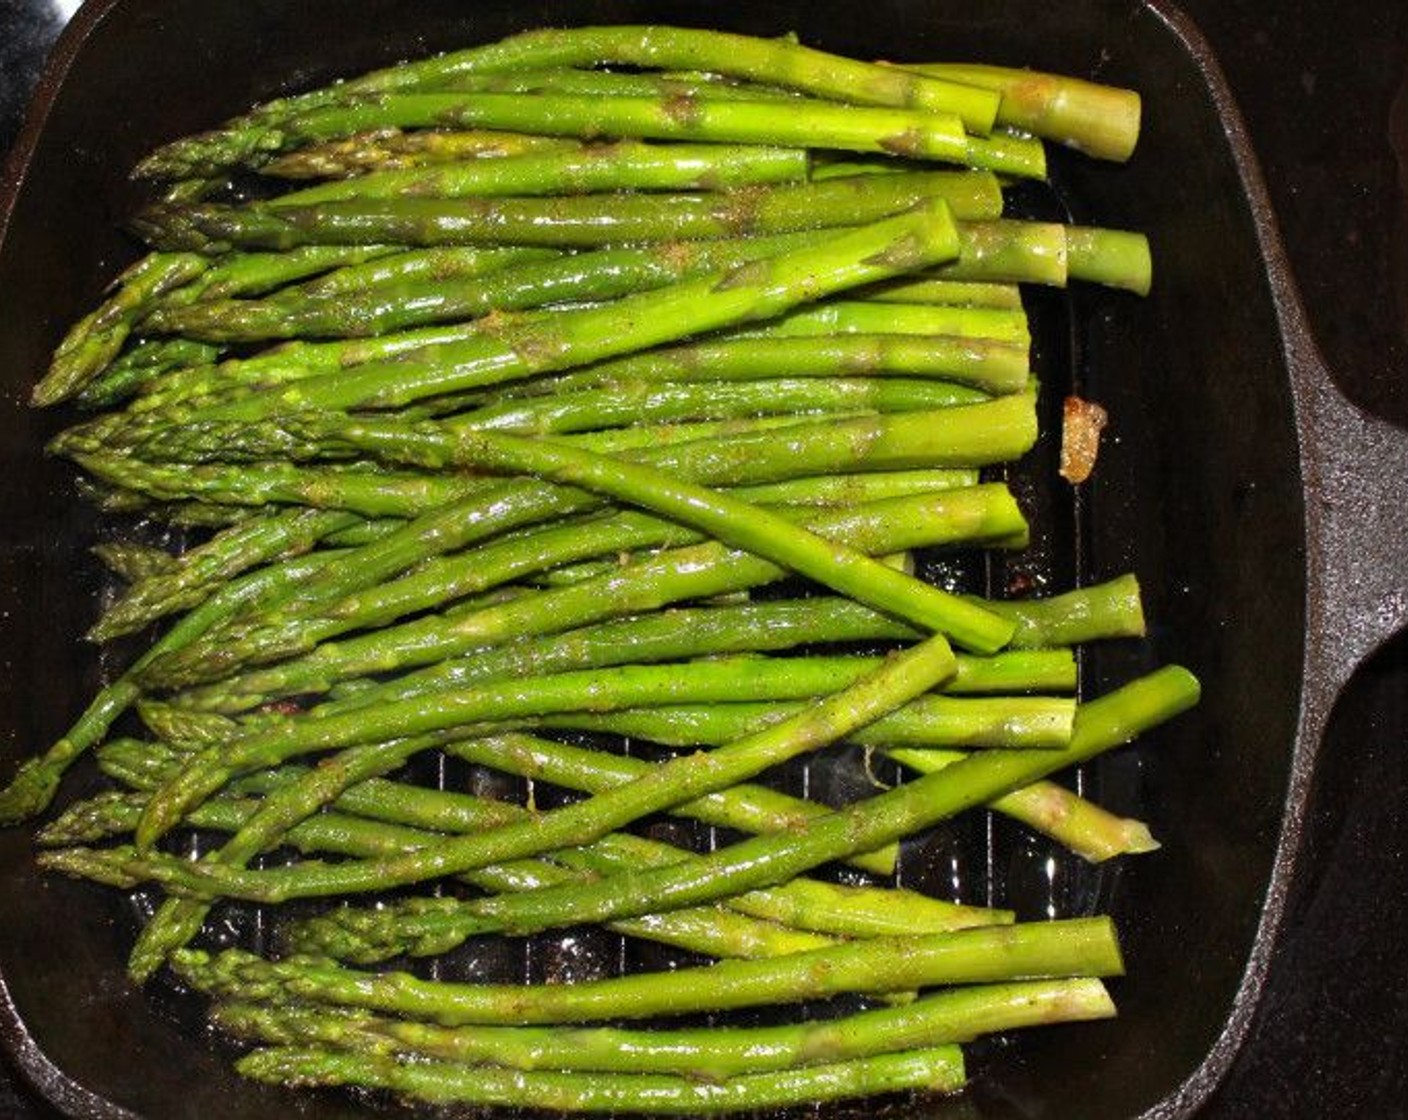 step 8 Repeat the seasoning with the asparagus. Coat in Peanut Oil (1/2 Tbsp), Kosher Salt (to taste), Cayenne Pepper (to taste), and Granulated Garlic (to taste), Grill asparagus until heated through and there are grill marks.